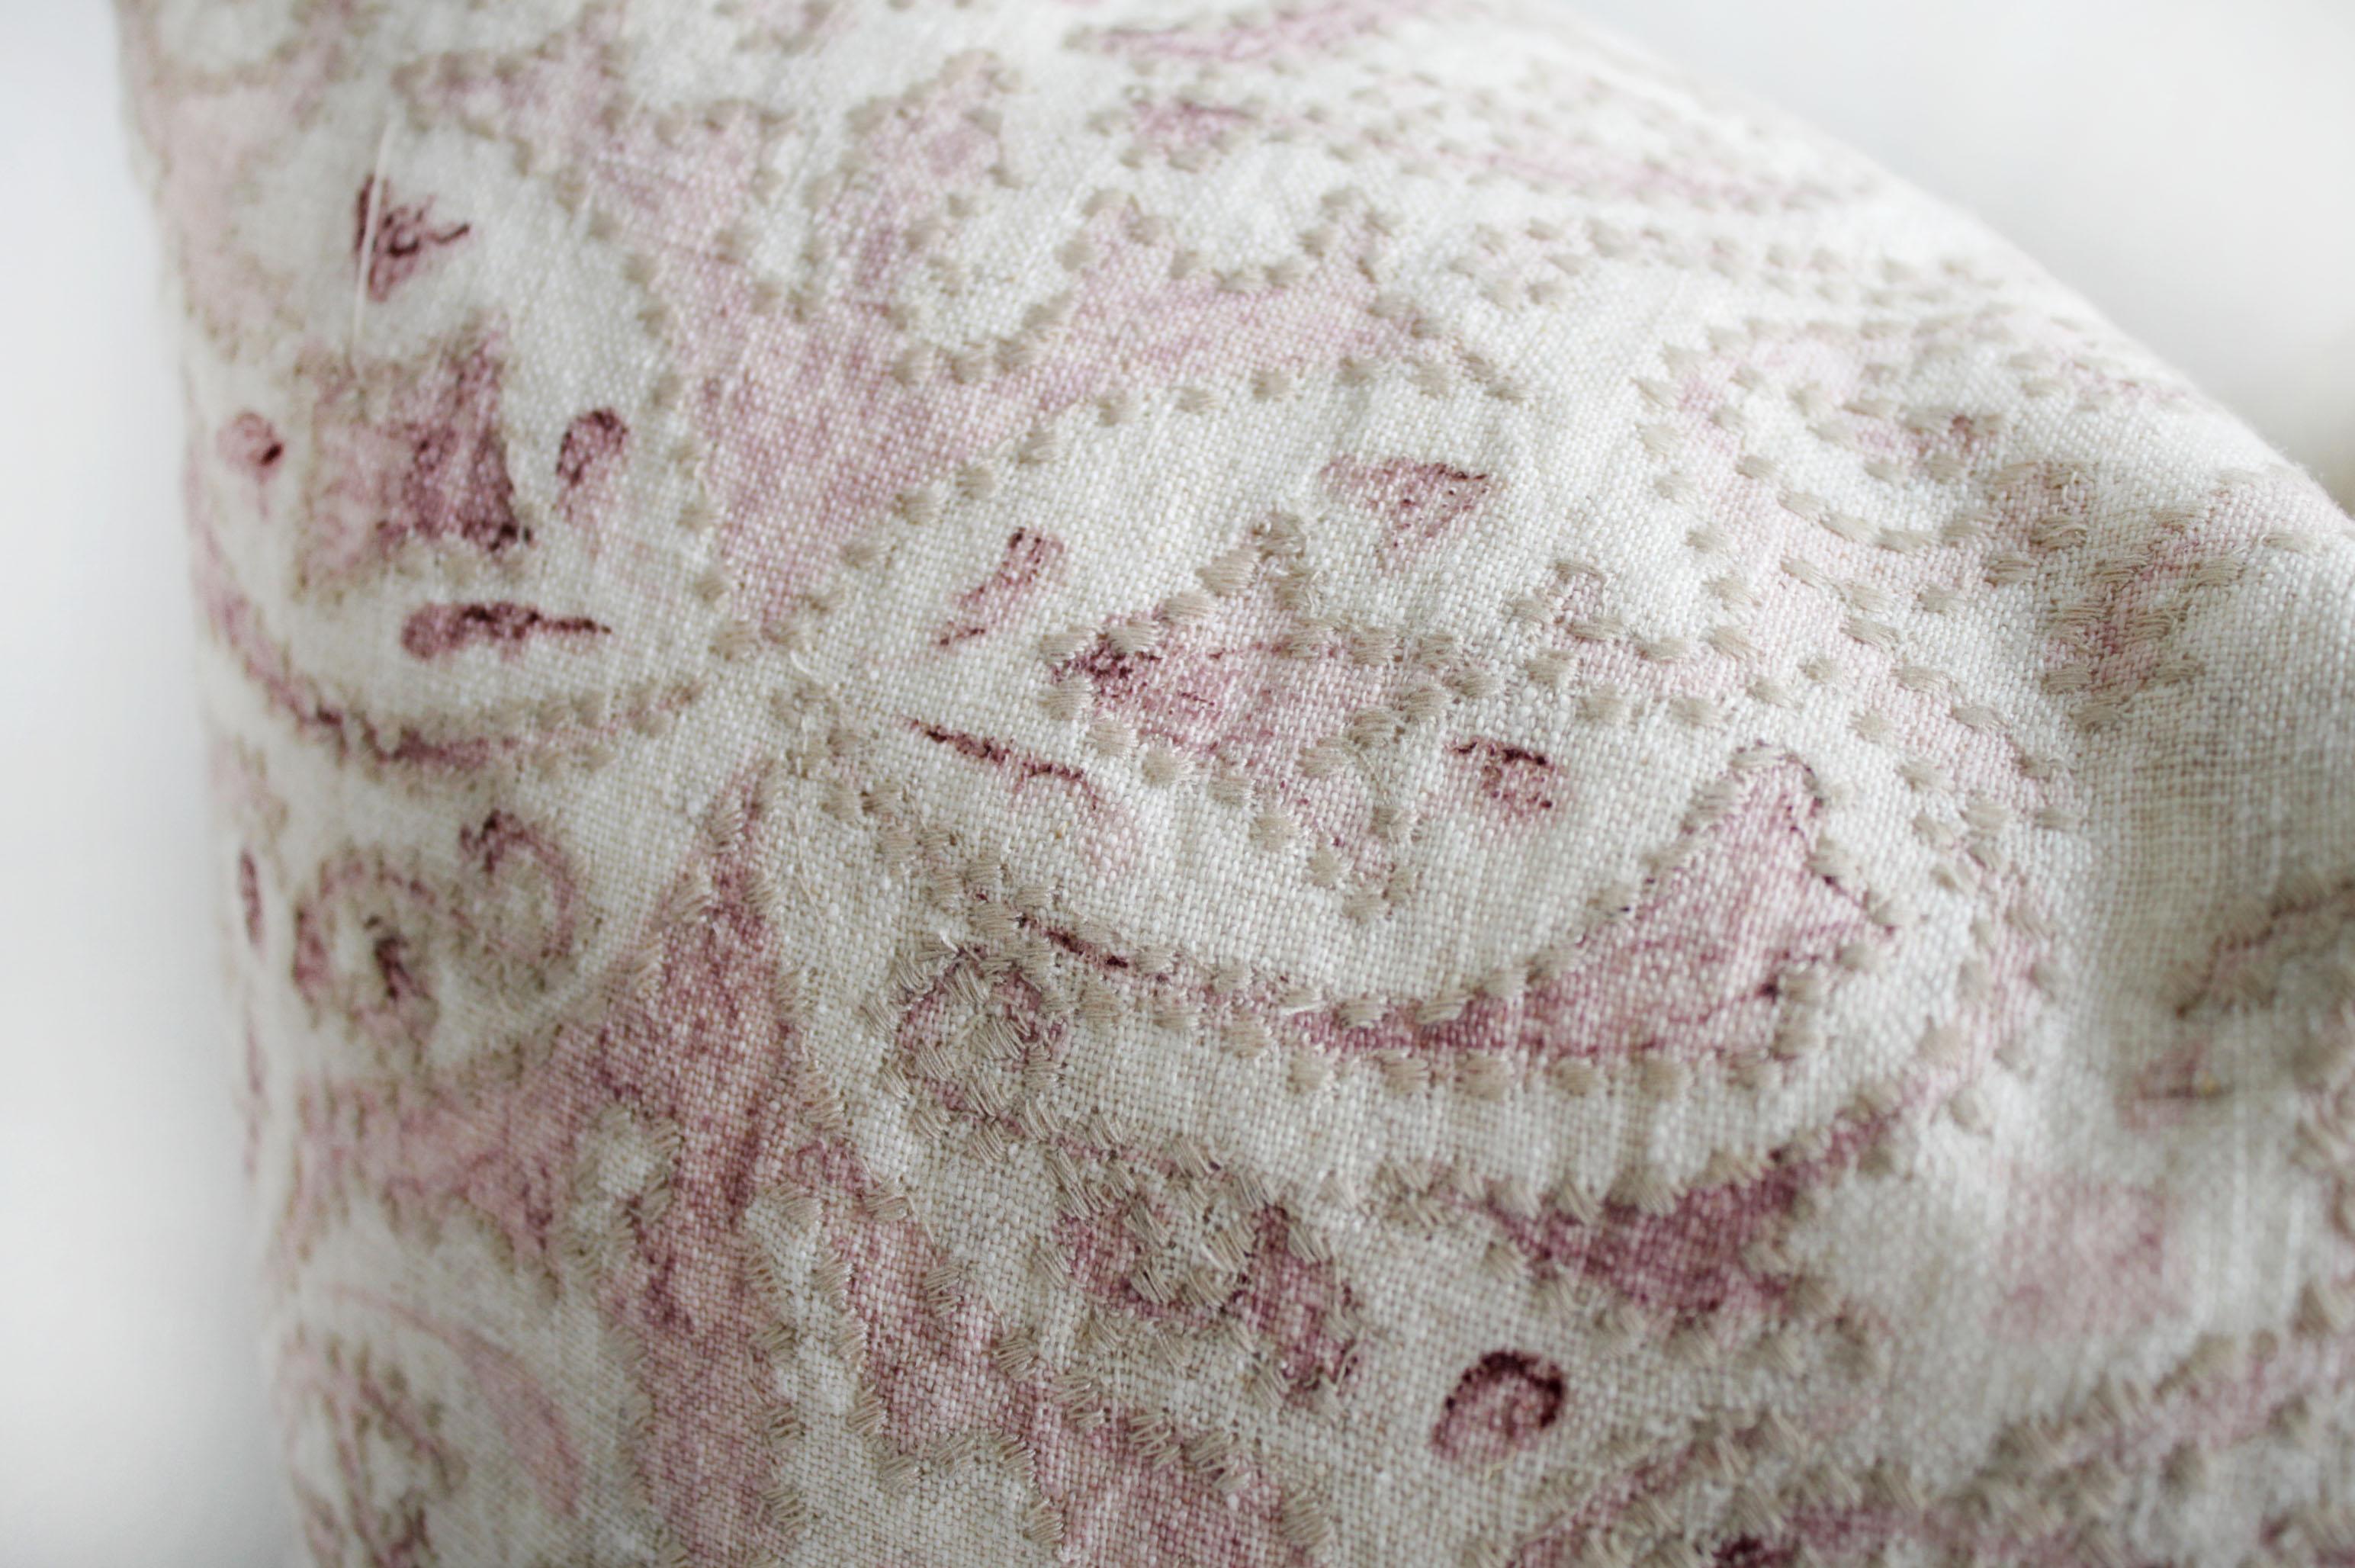 Embroidered Linen pillow cover in blush pinks and natural linen
This linen pillow face has a natural linen colored background with blush pinks and cream and natural embroidery. The backing is 100% linen natural. Our pillows are constructed with one